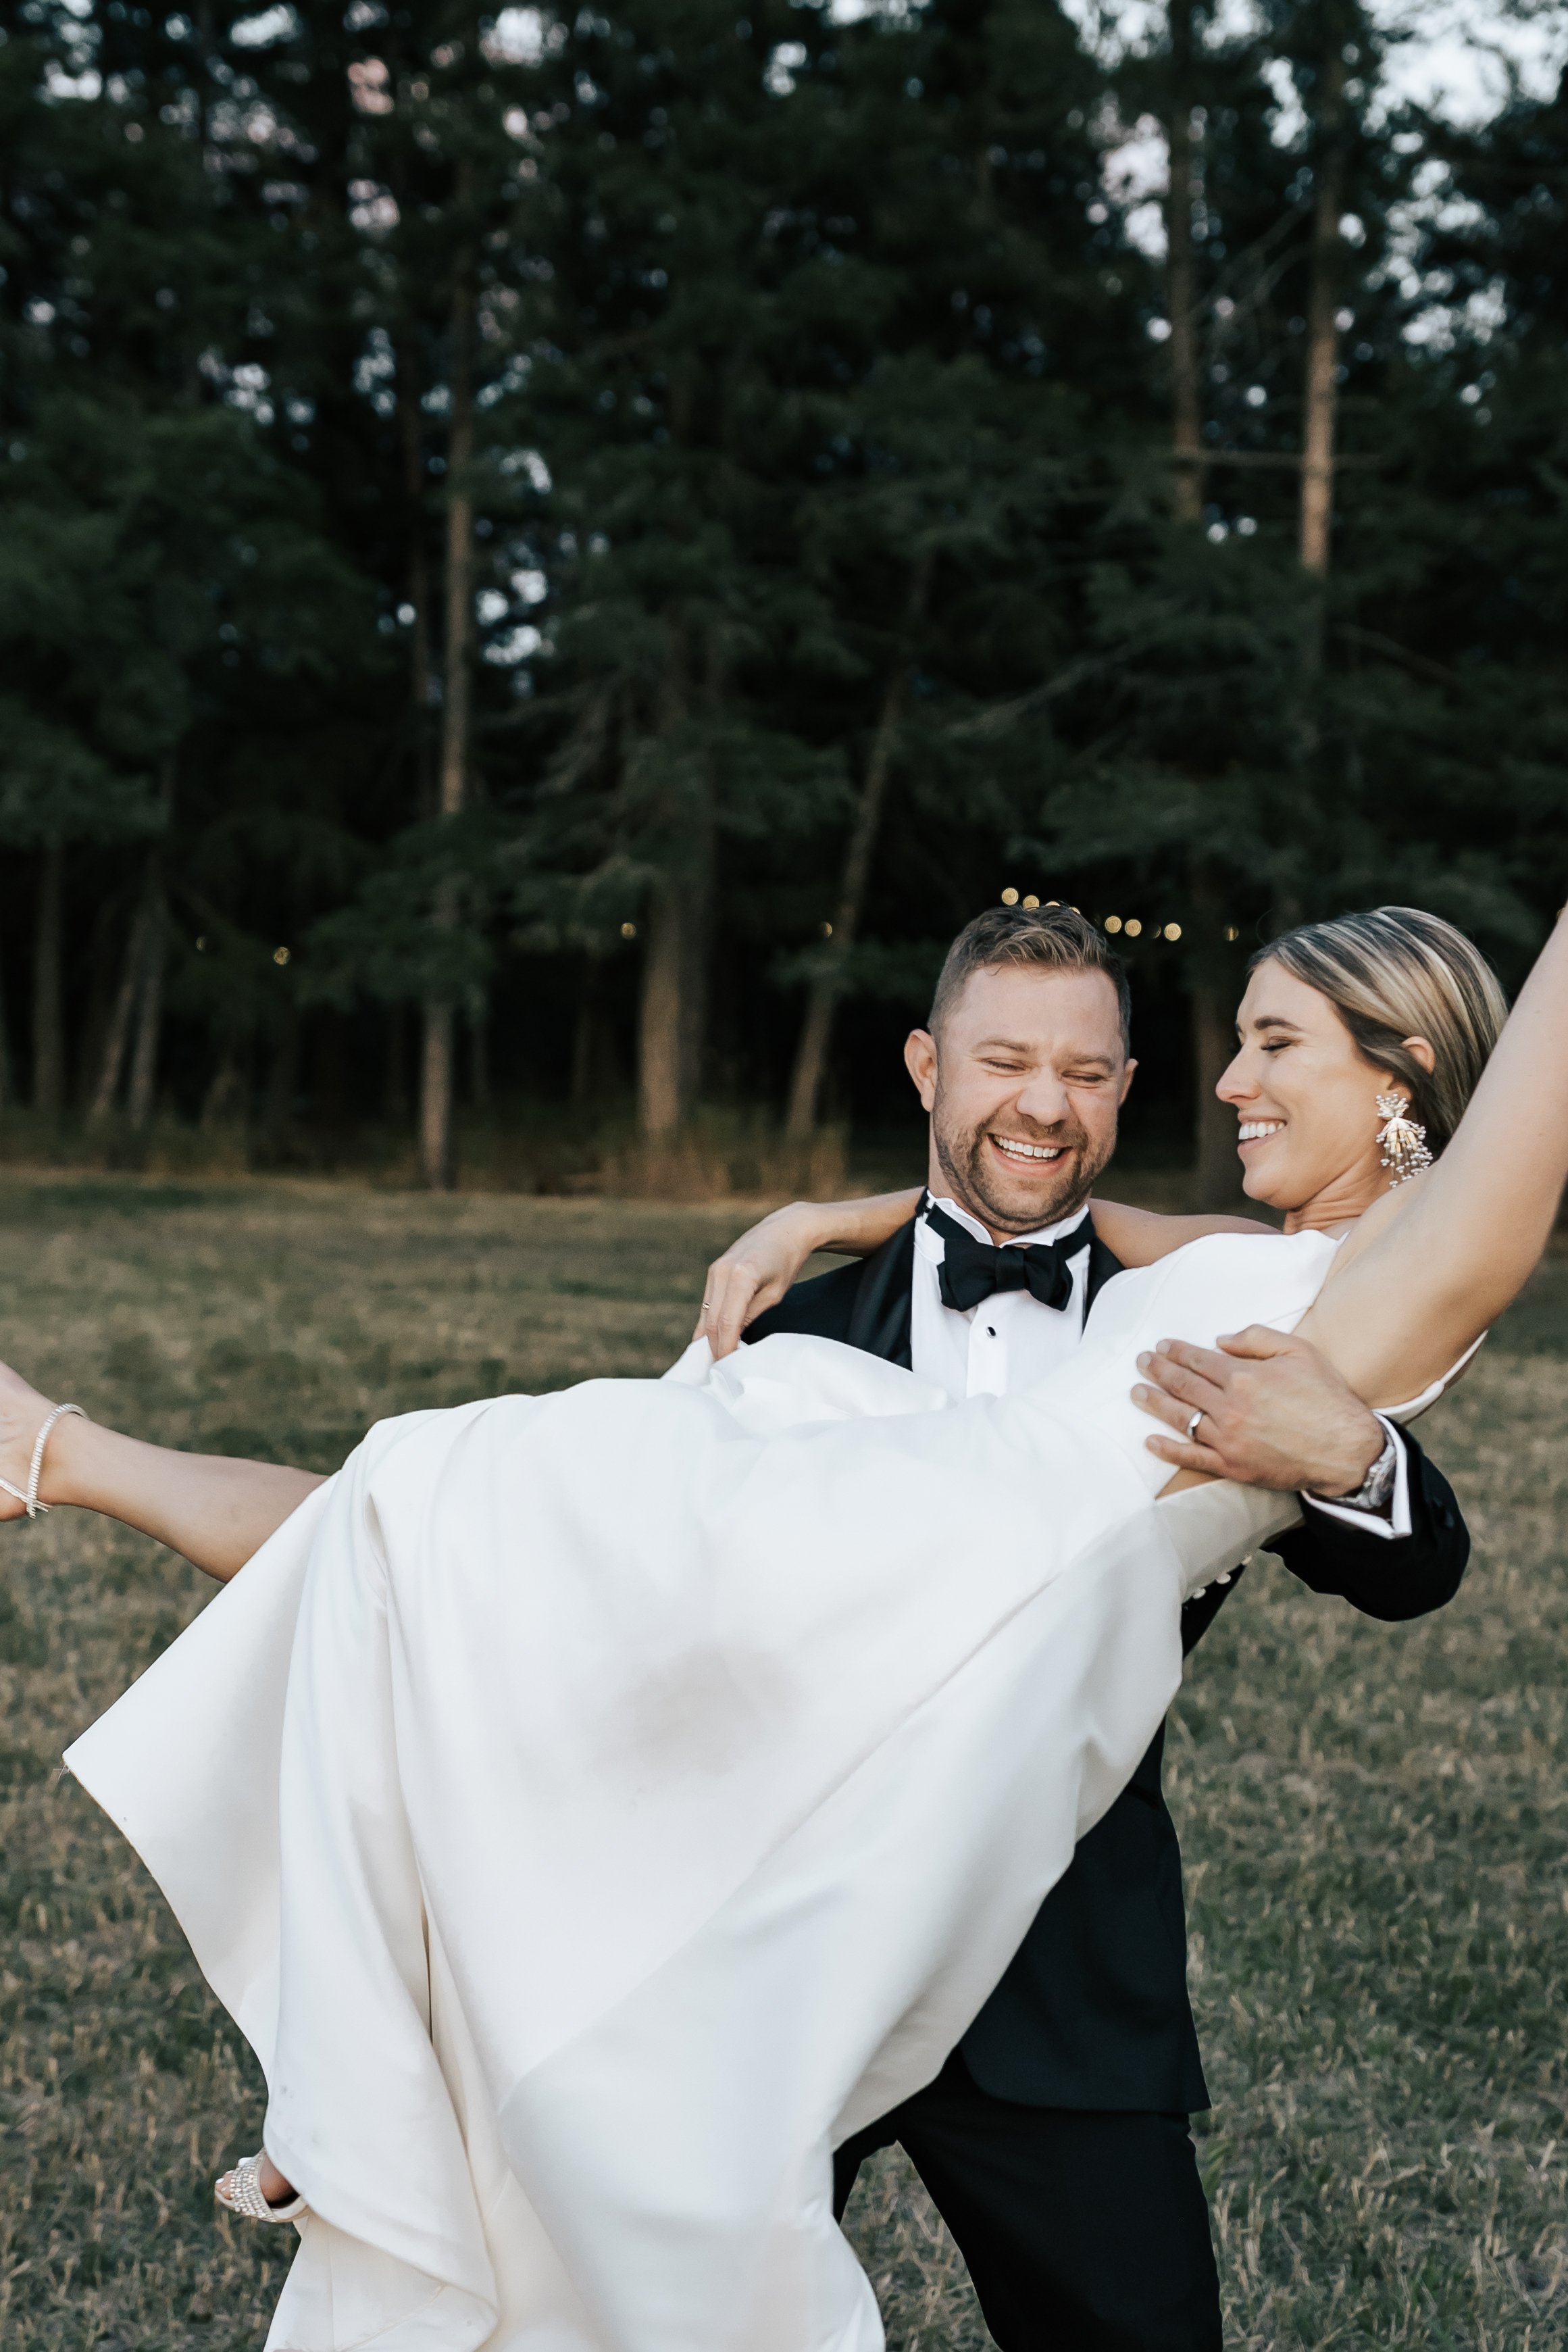  Bride and groom wedding portraits surrounded by pine trees. Bride and groom smile at wedding in the forest in Whitefish, Montana. Wedding inspo. Bride is wearing gorgeous large white earrings with a strappy wedding dress and veil and groom is wearin